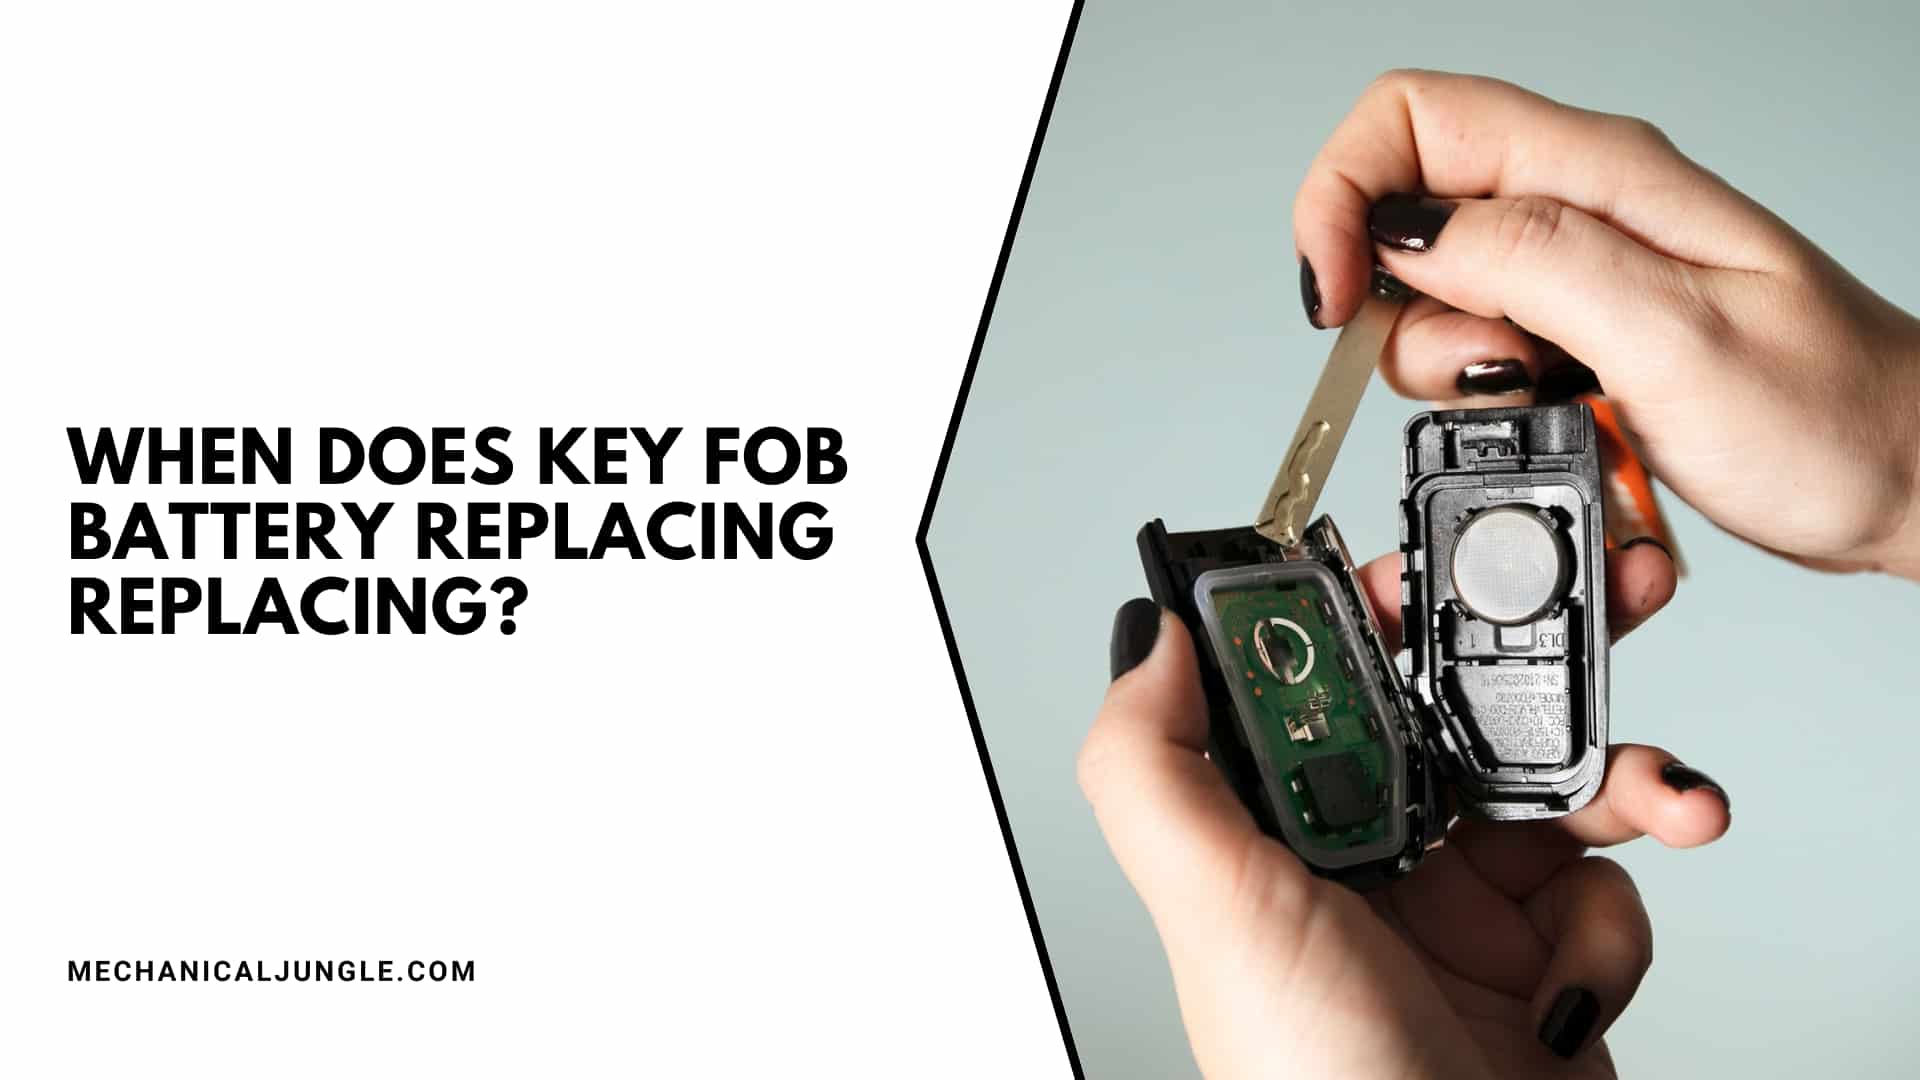 When Does Key Fob Battery Replacing Replacing?